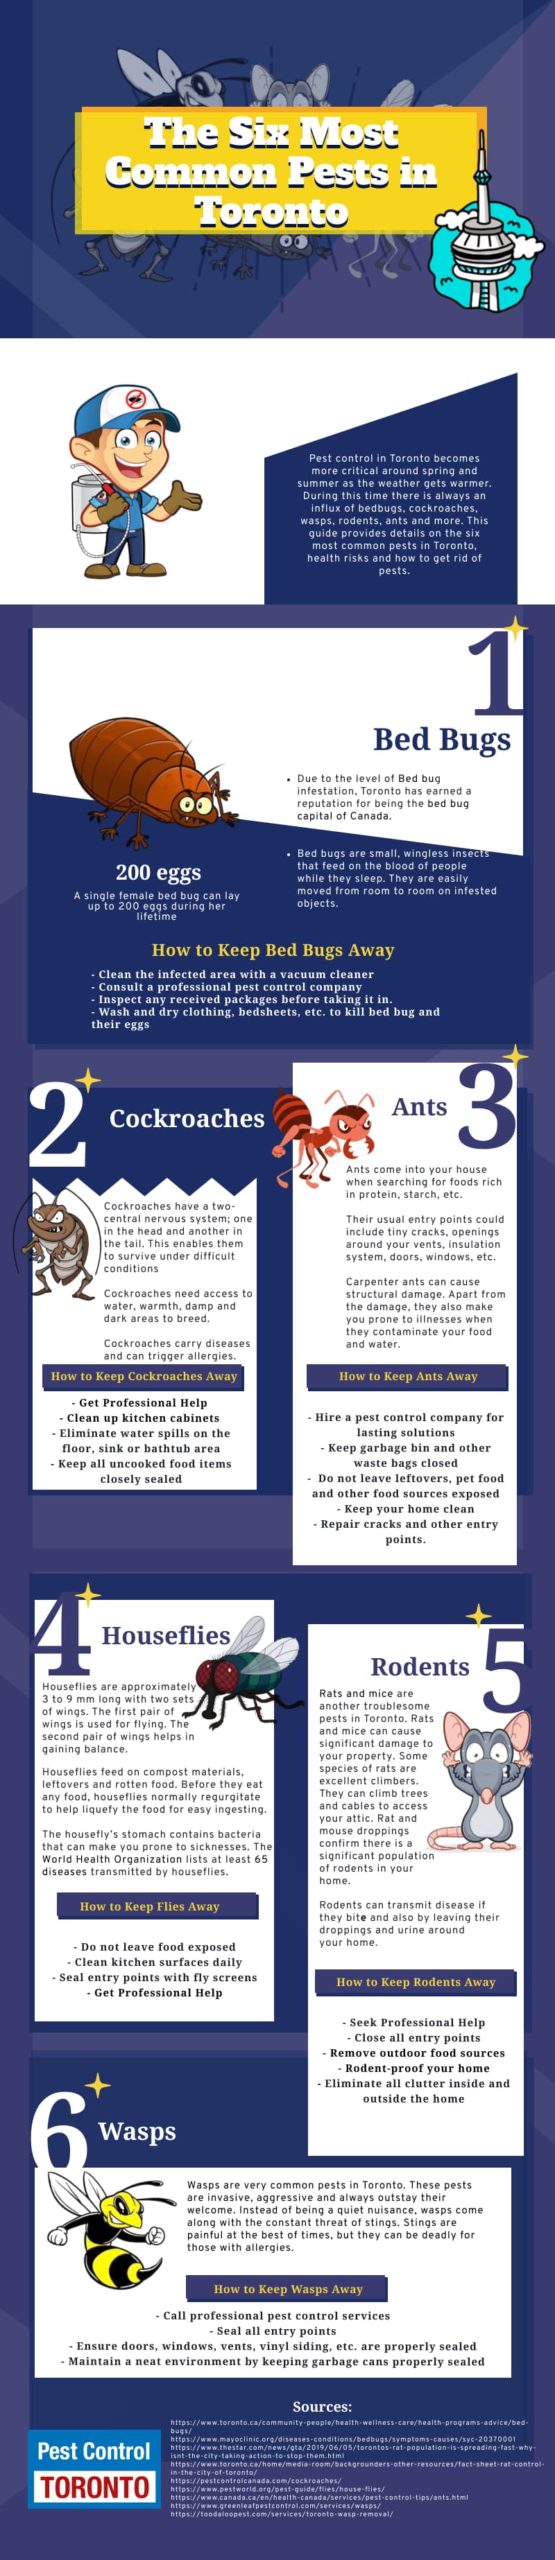 6 most common pests in toronto infographic